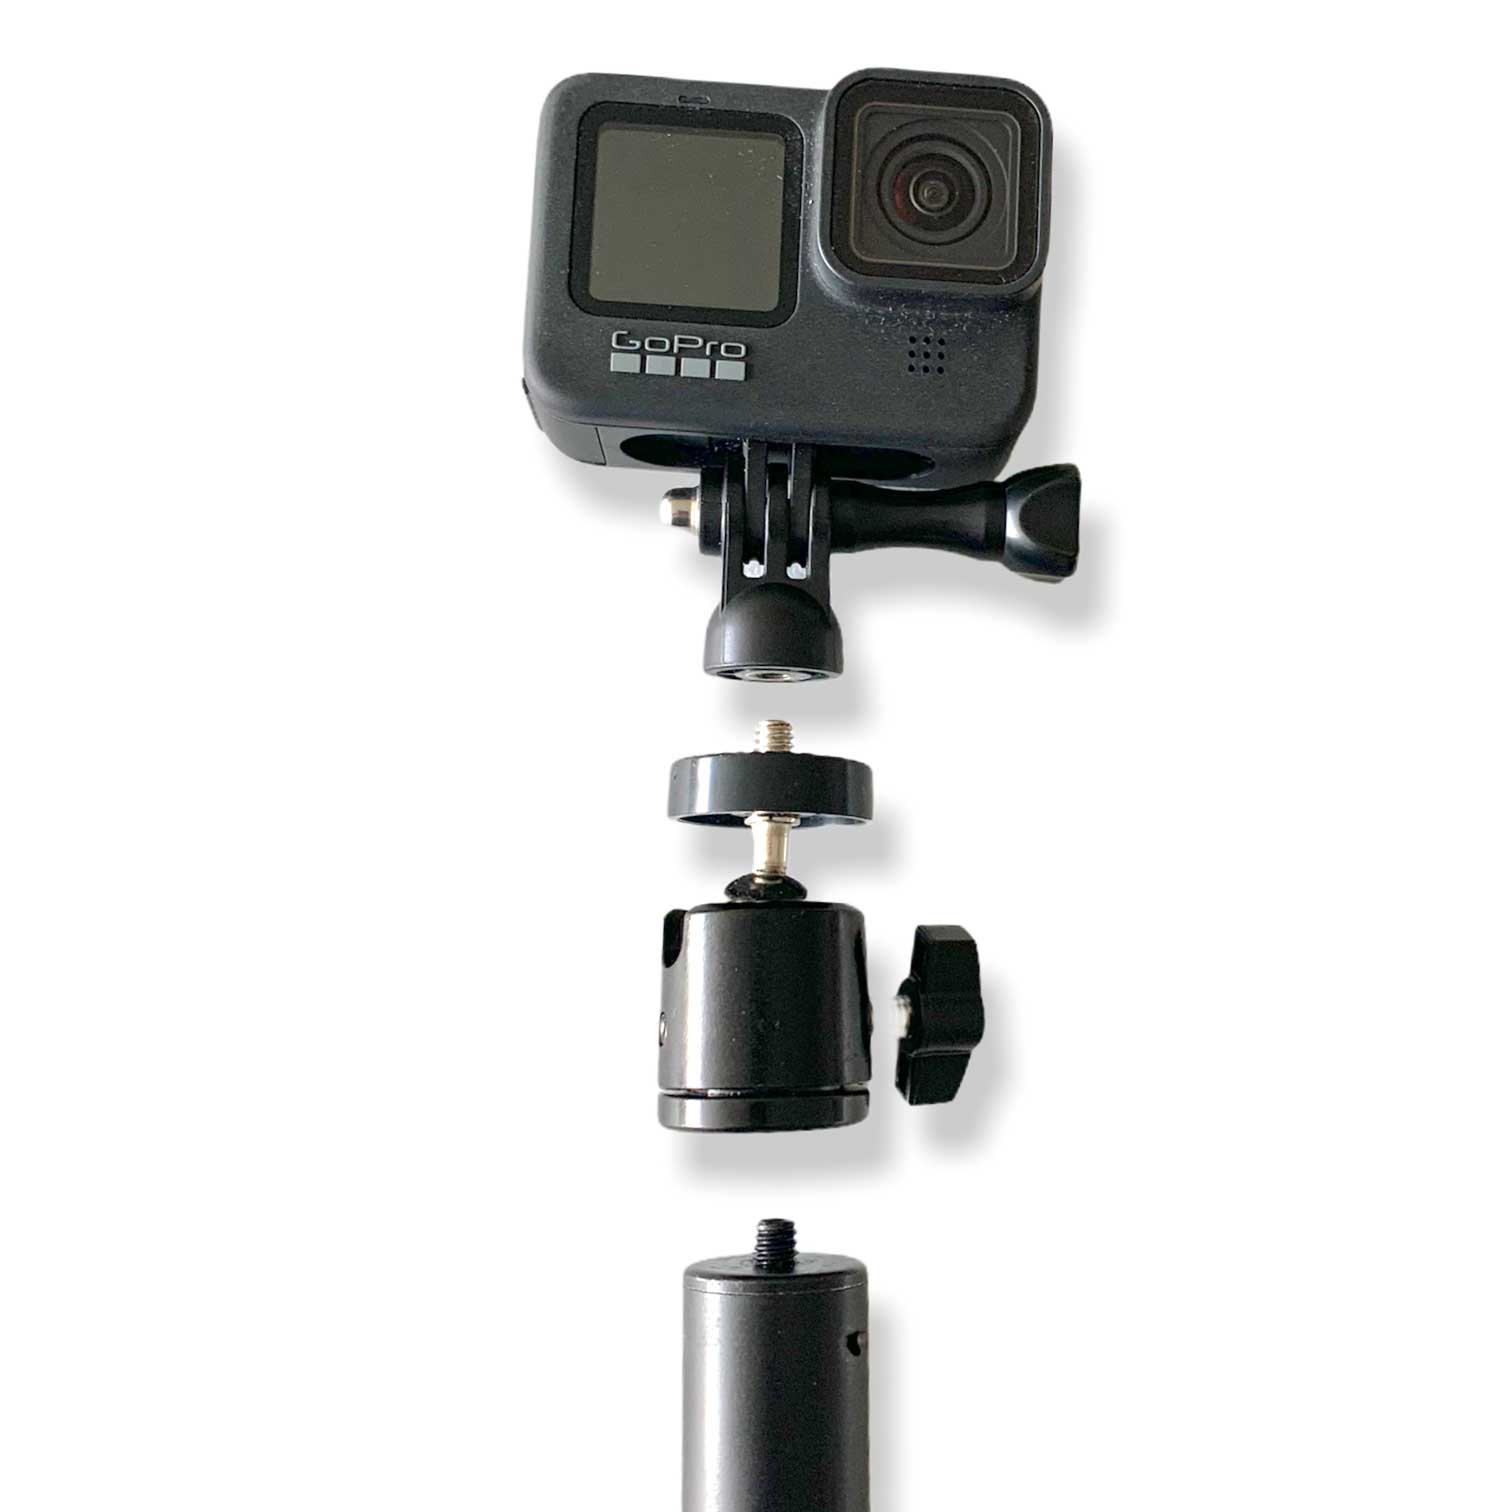 3rdPersonView Shoulder Mount for GoPro Max and others